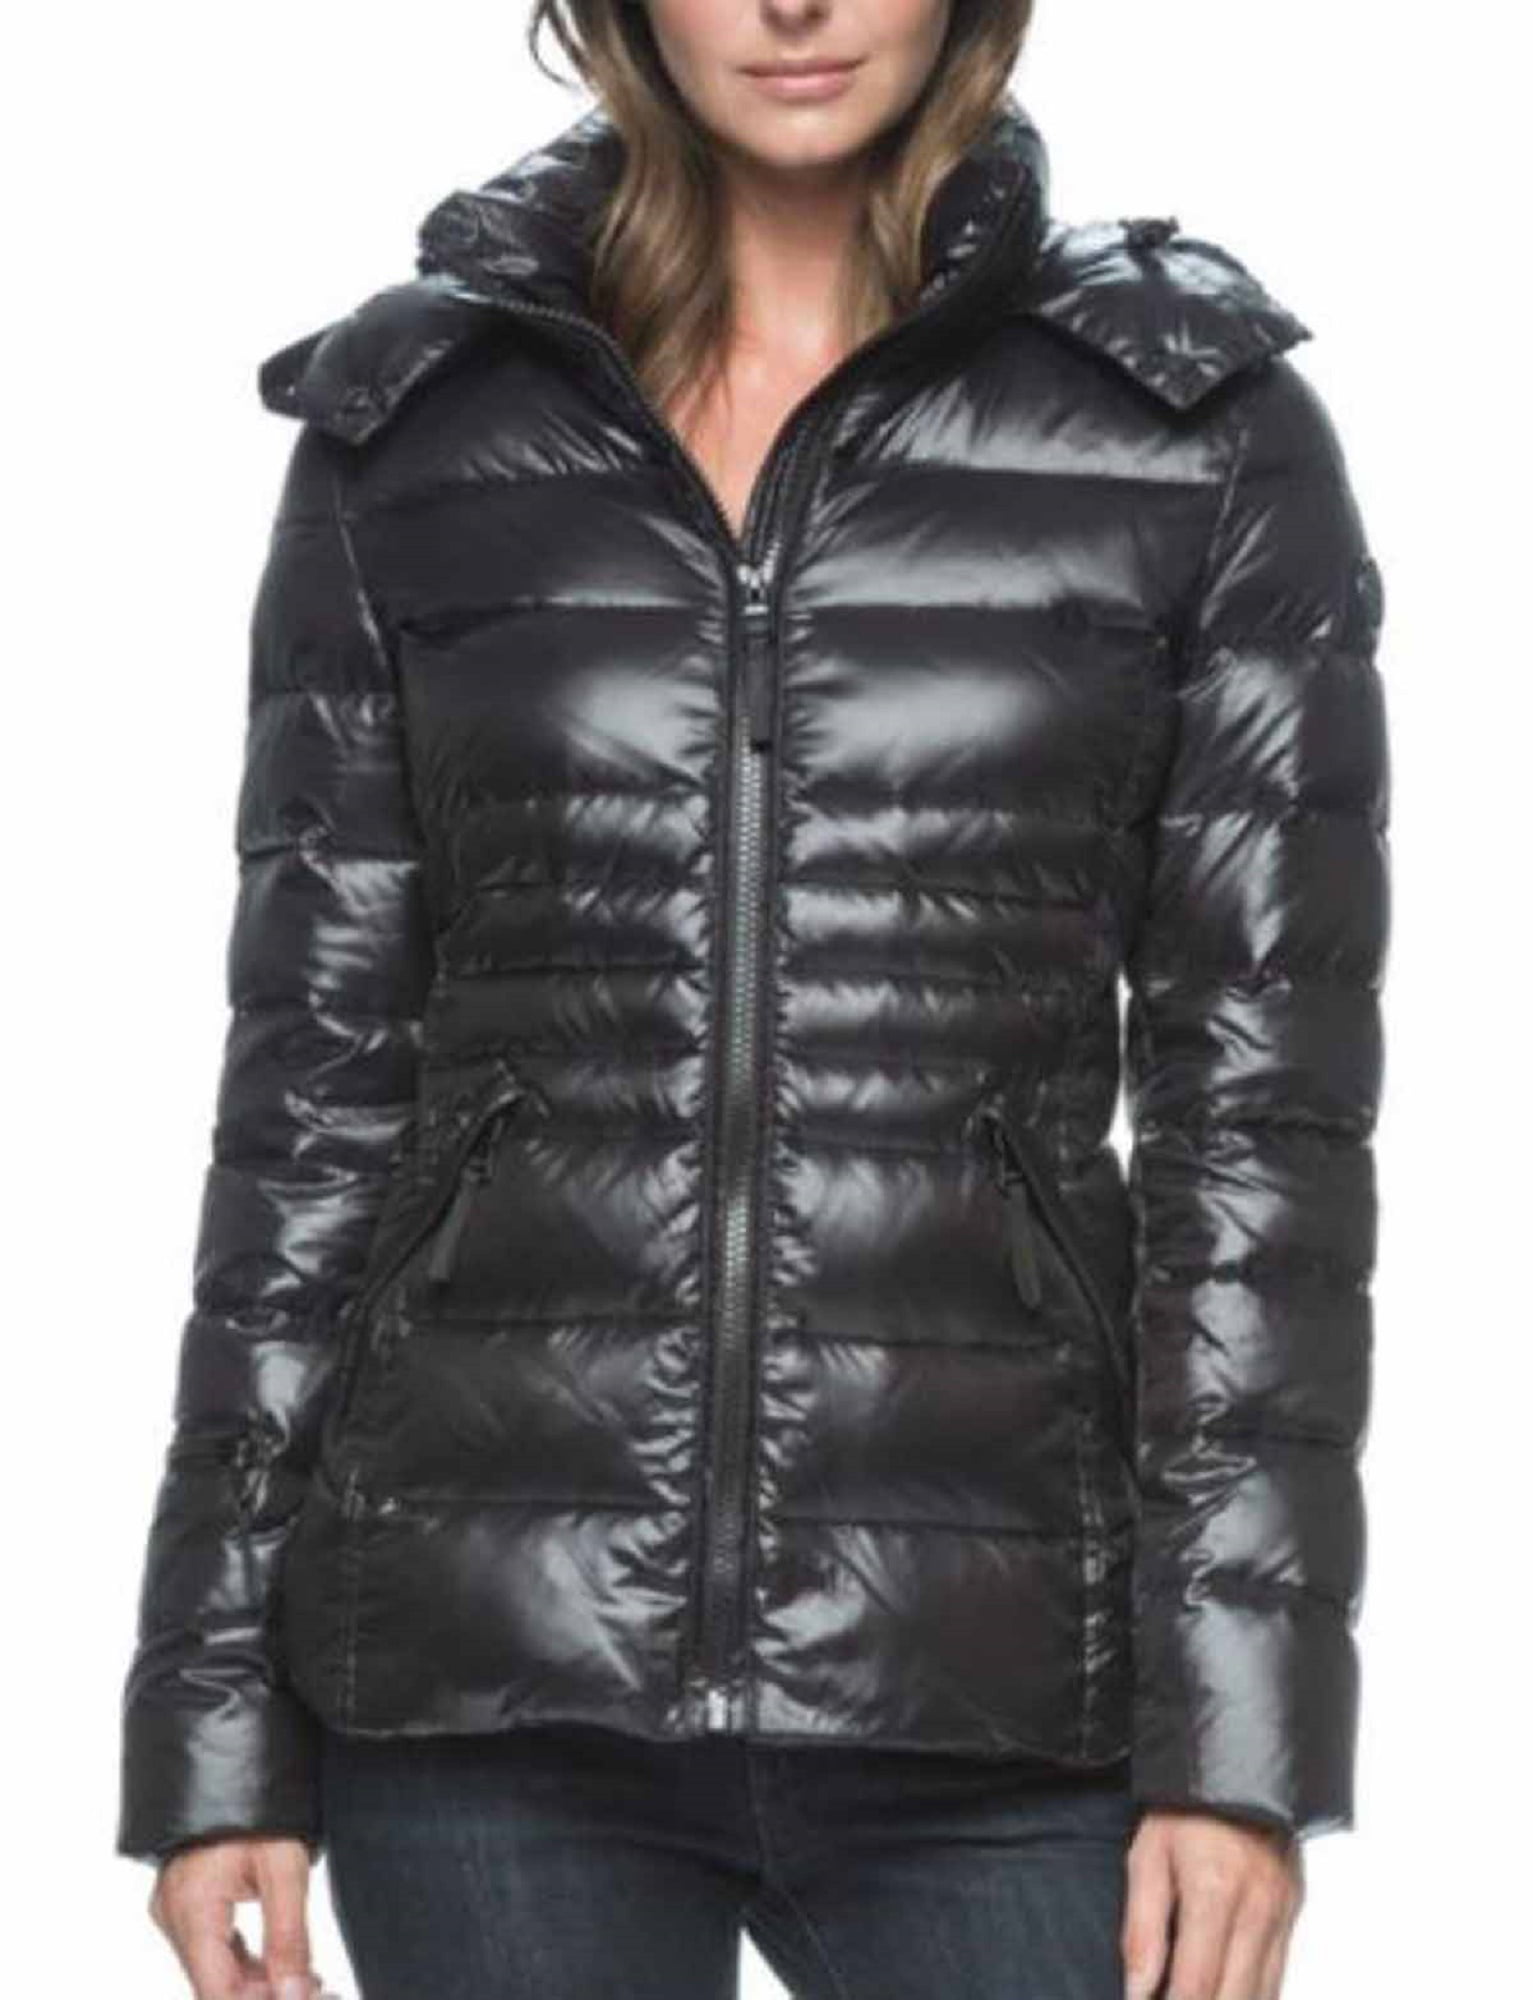 NEW! Andrew Marc Women's Premium Down Hooded Jacket Variety 